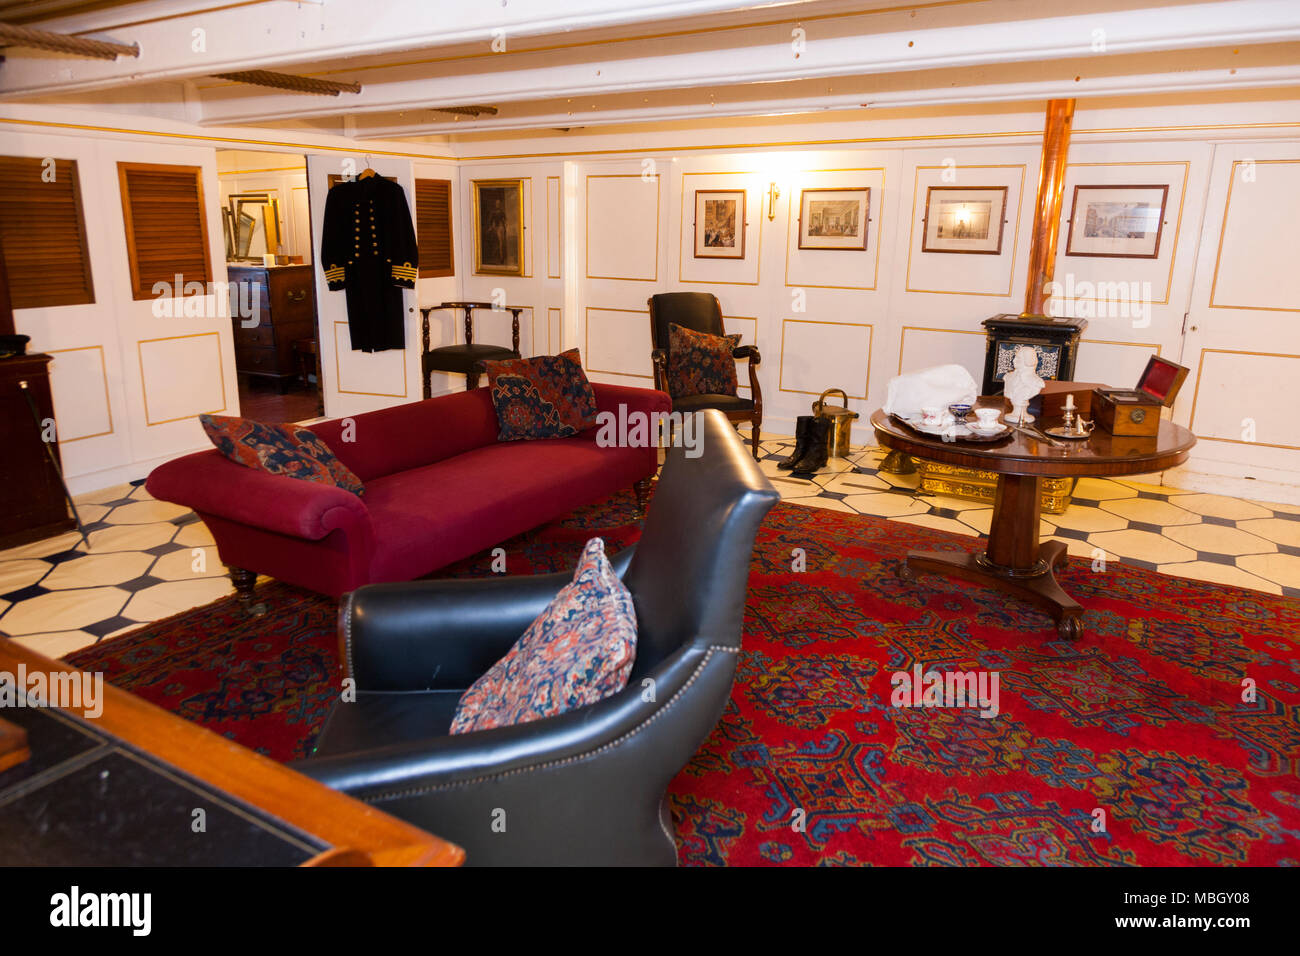 Identified by information sign as Captain 's ( quarters / rooms / lounge / reception room / suite ) on HMS Warrior. Portsmouth Historic Dockyard. UK. Stock Photo